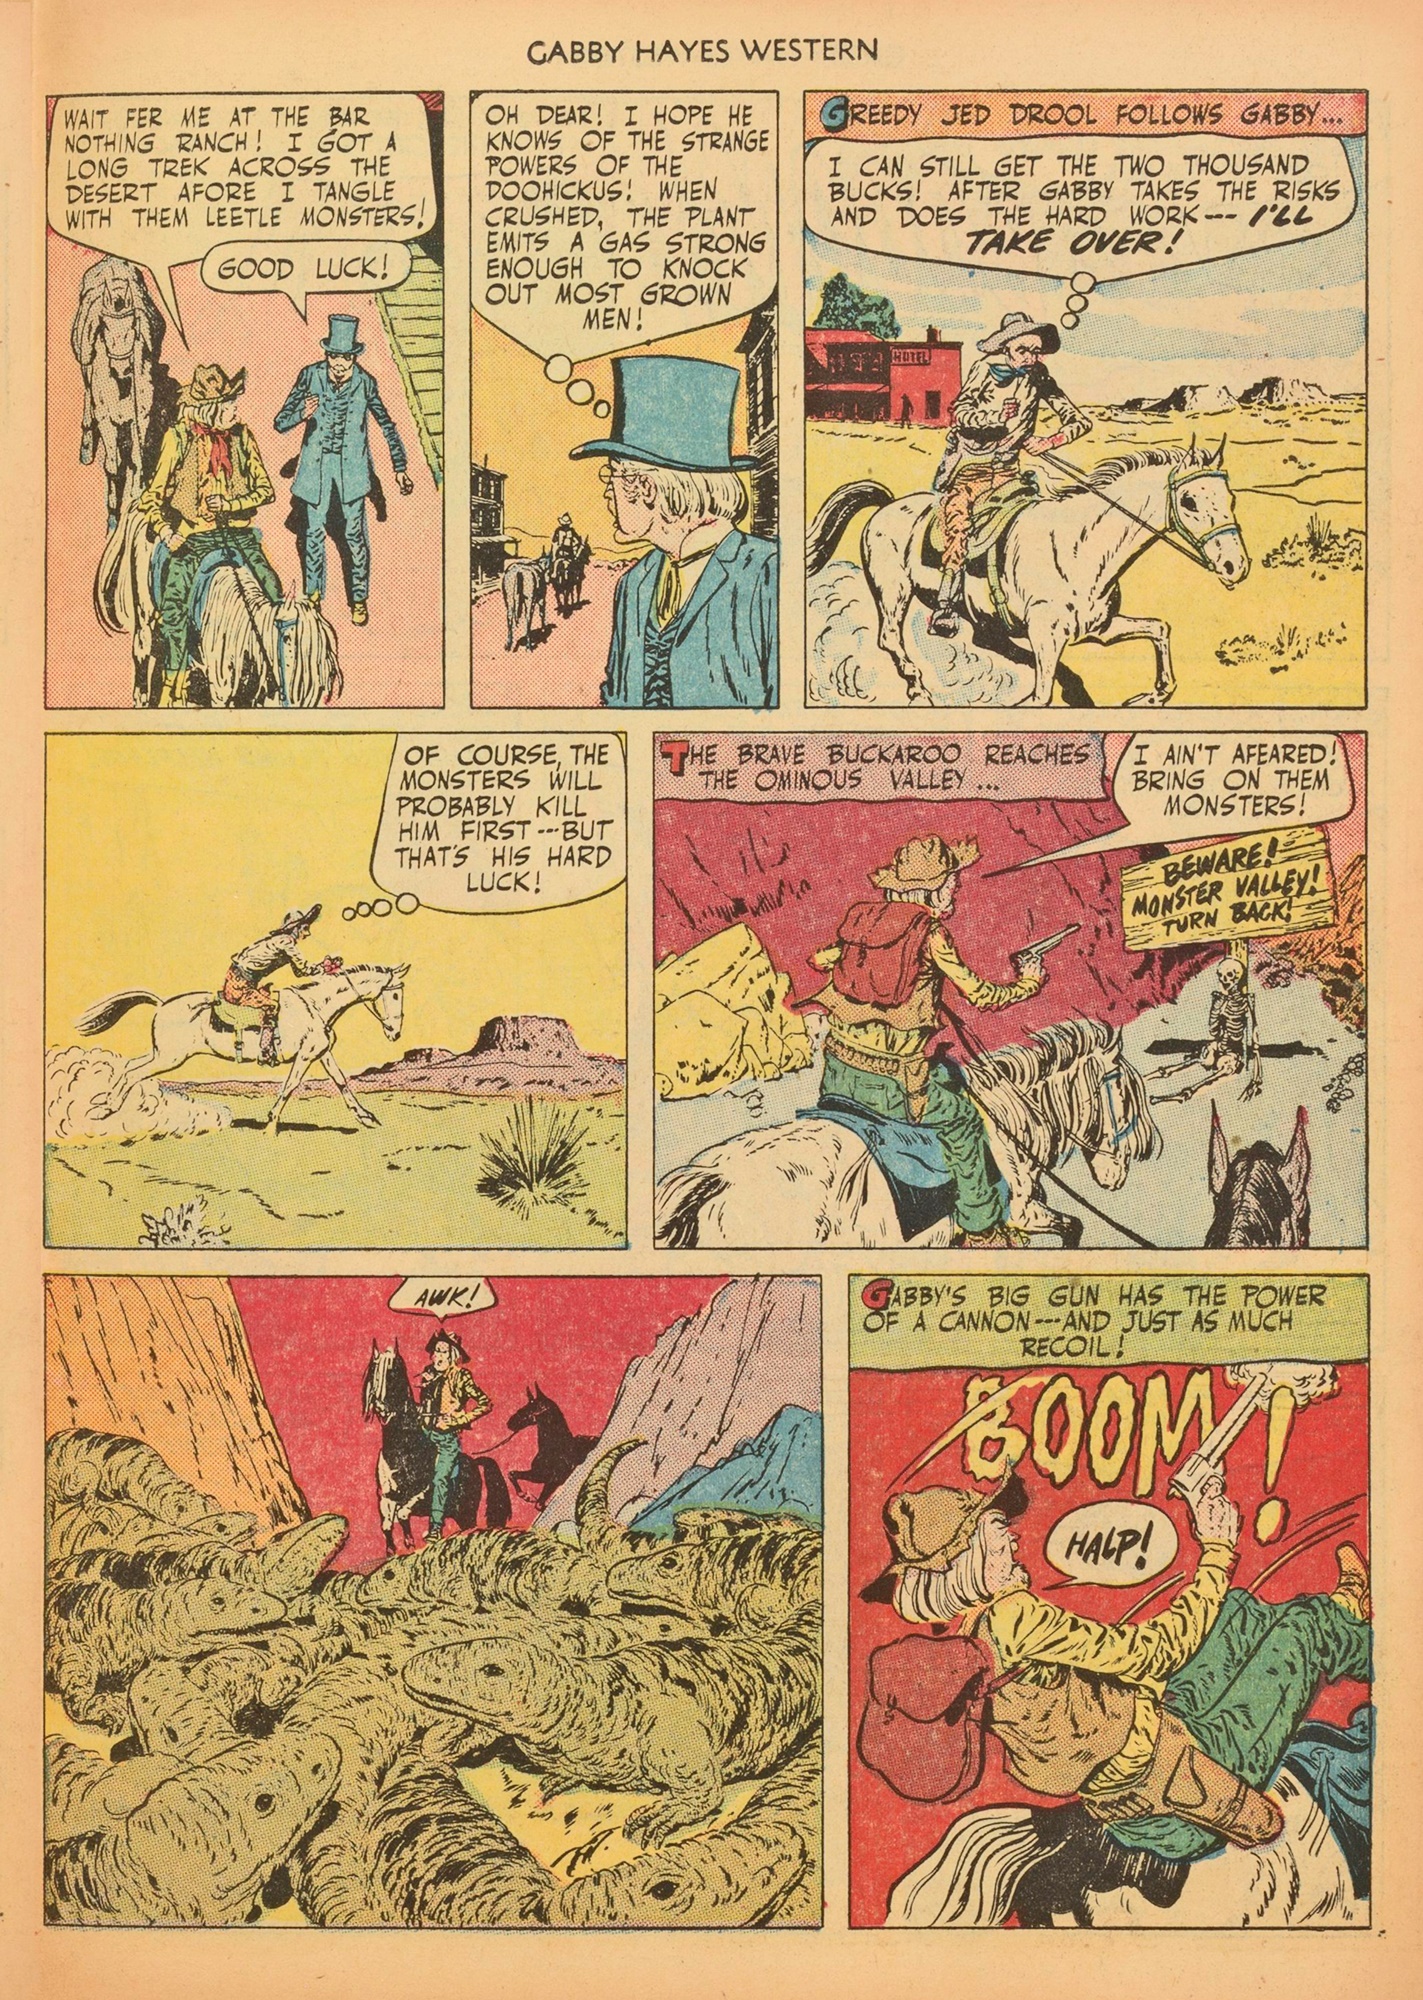 Read online Gabby Hayes Western comic -  Issue #25 - 27